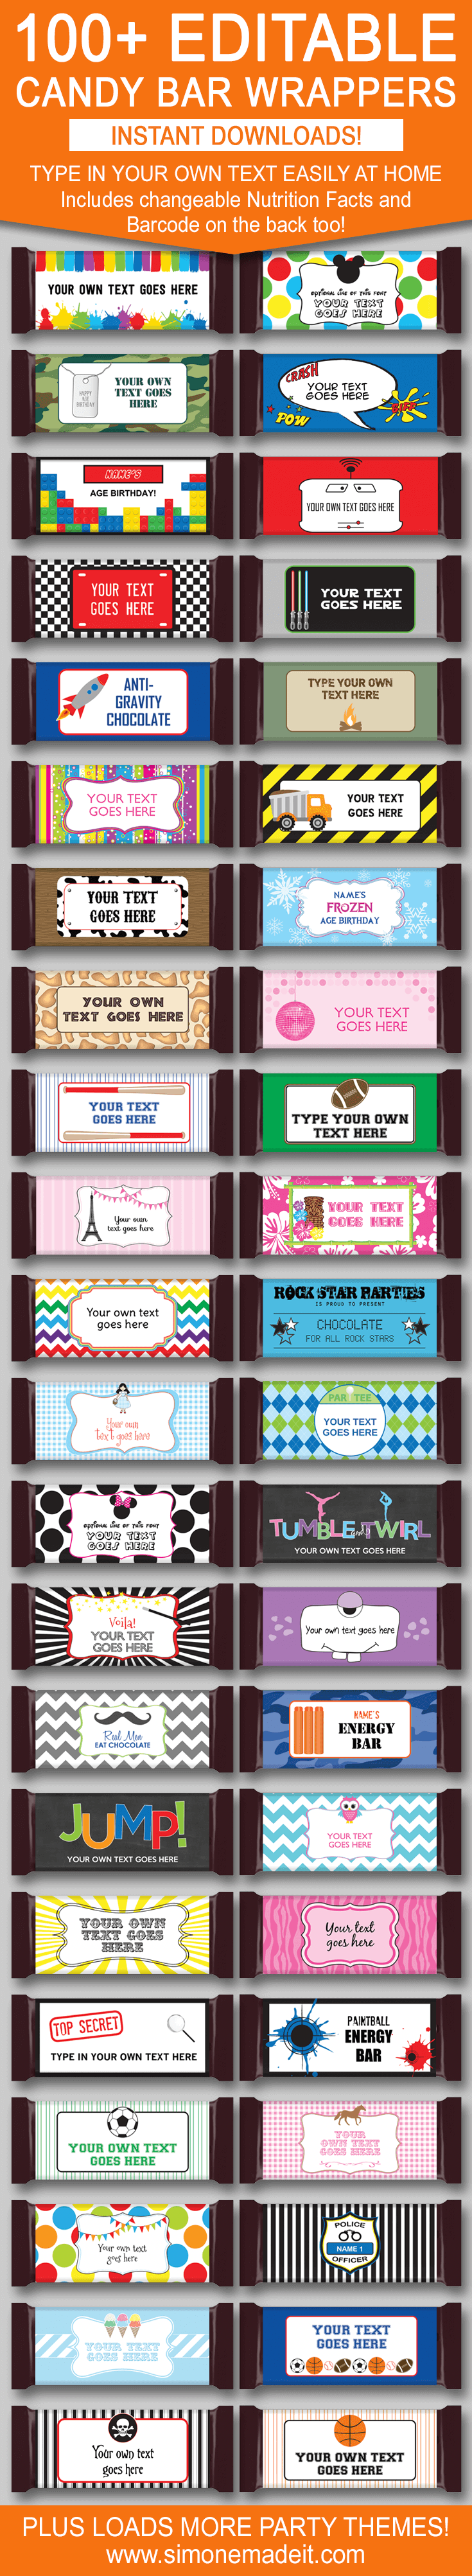 DIY Candy Bar Wrapper Templates Party Favors Chocolate Bar Labels - Free Printable Birthday Candy Bar Wrappers